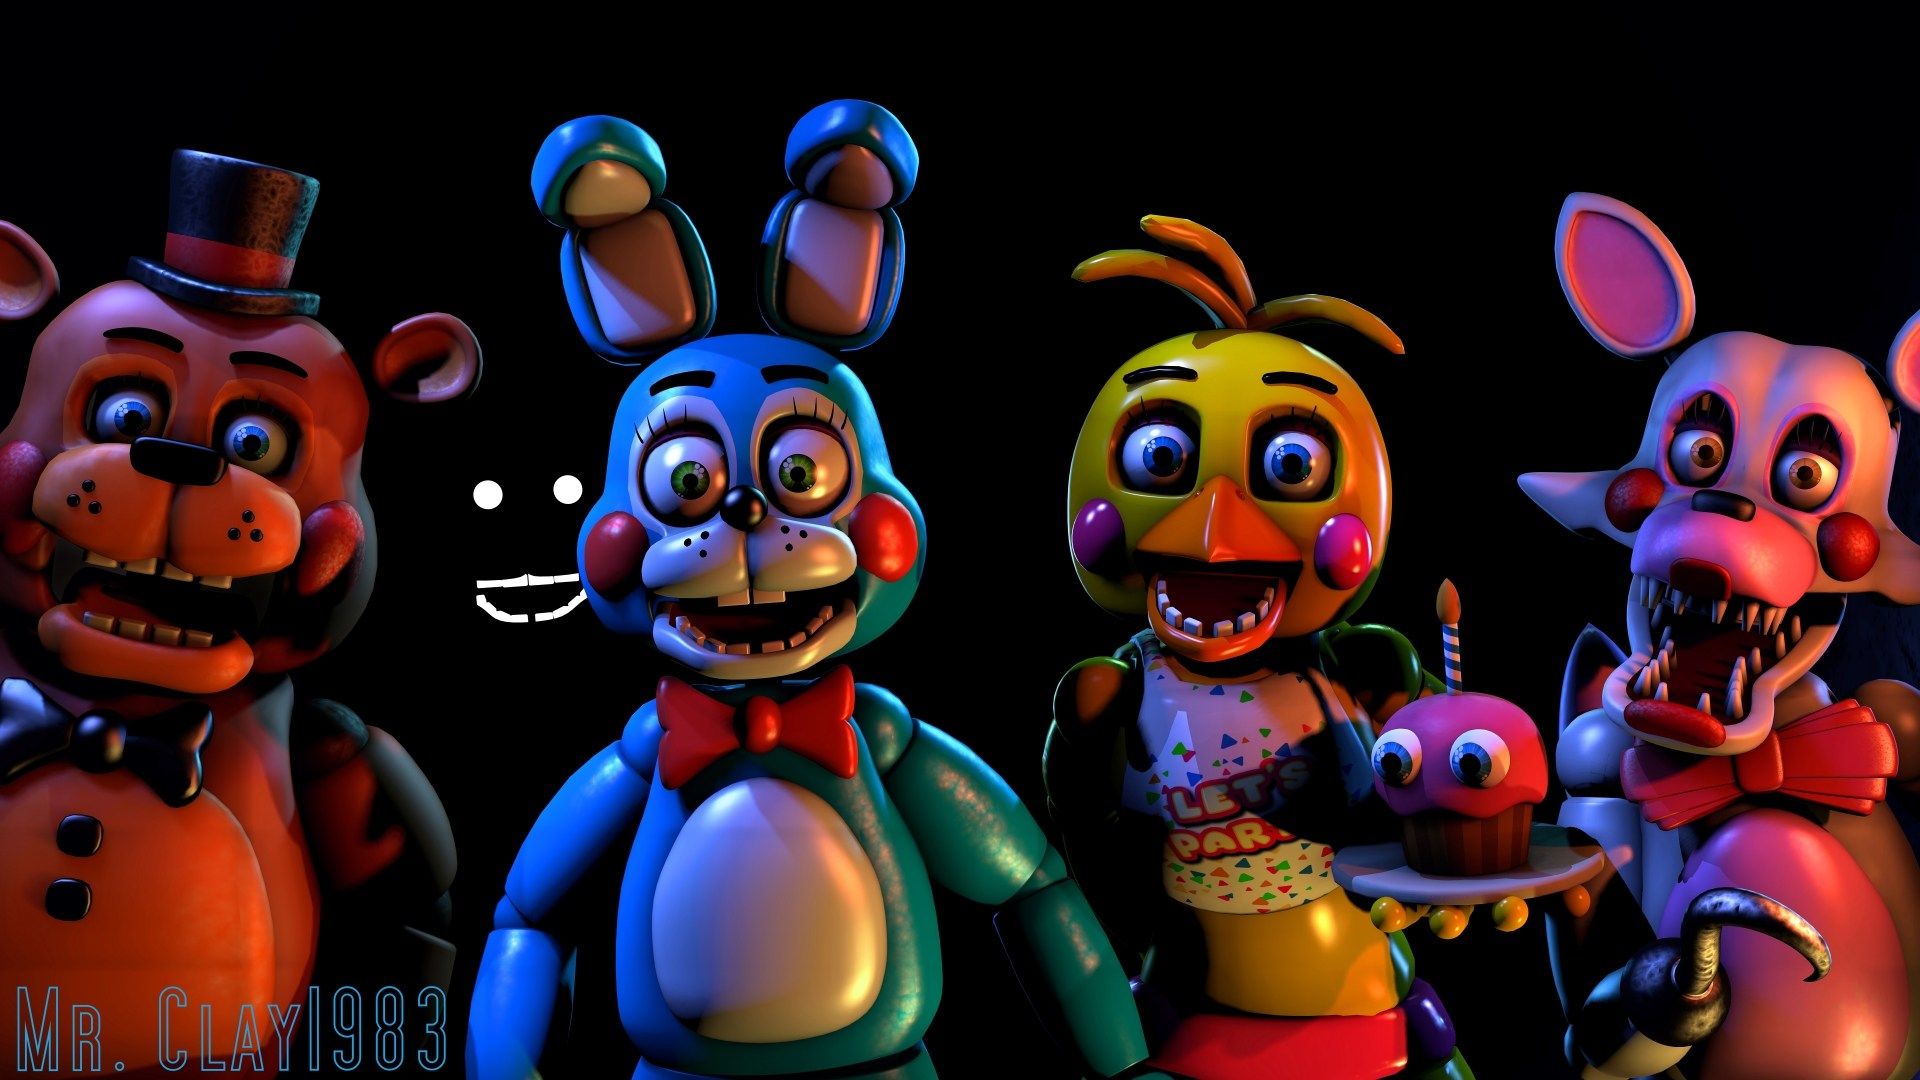 Five Nights At Freddy's 2 Wallpapers